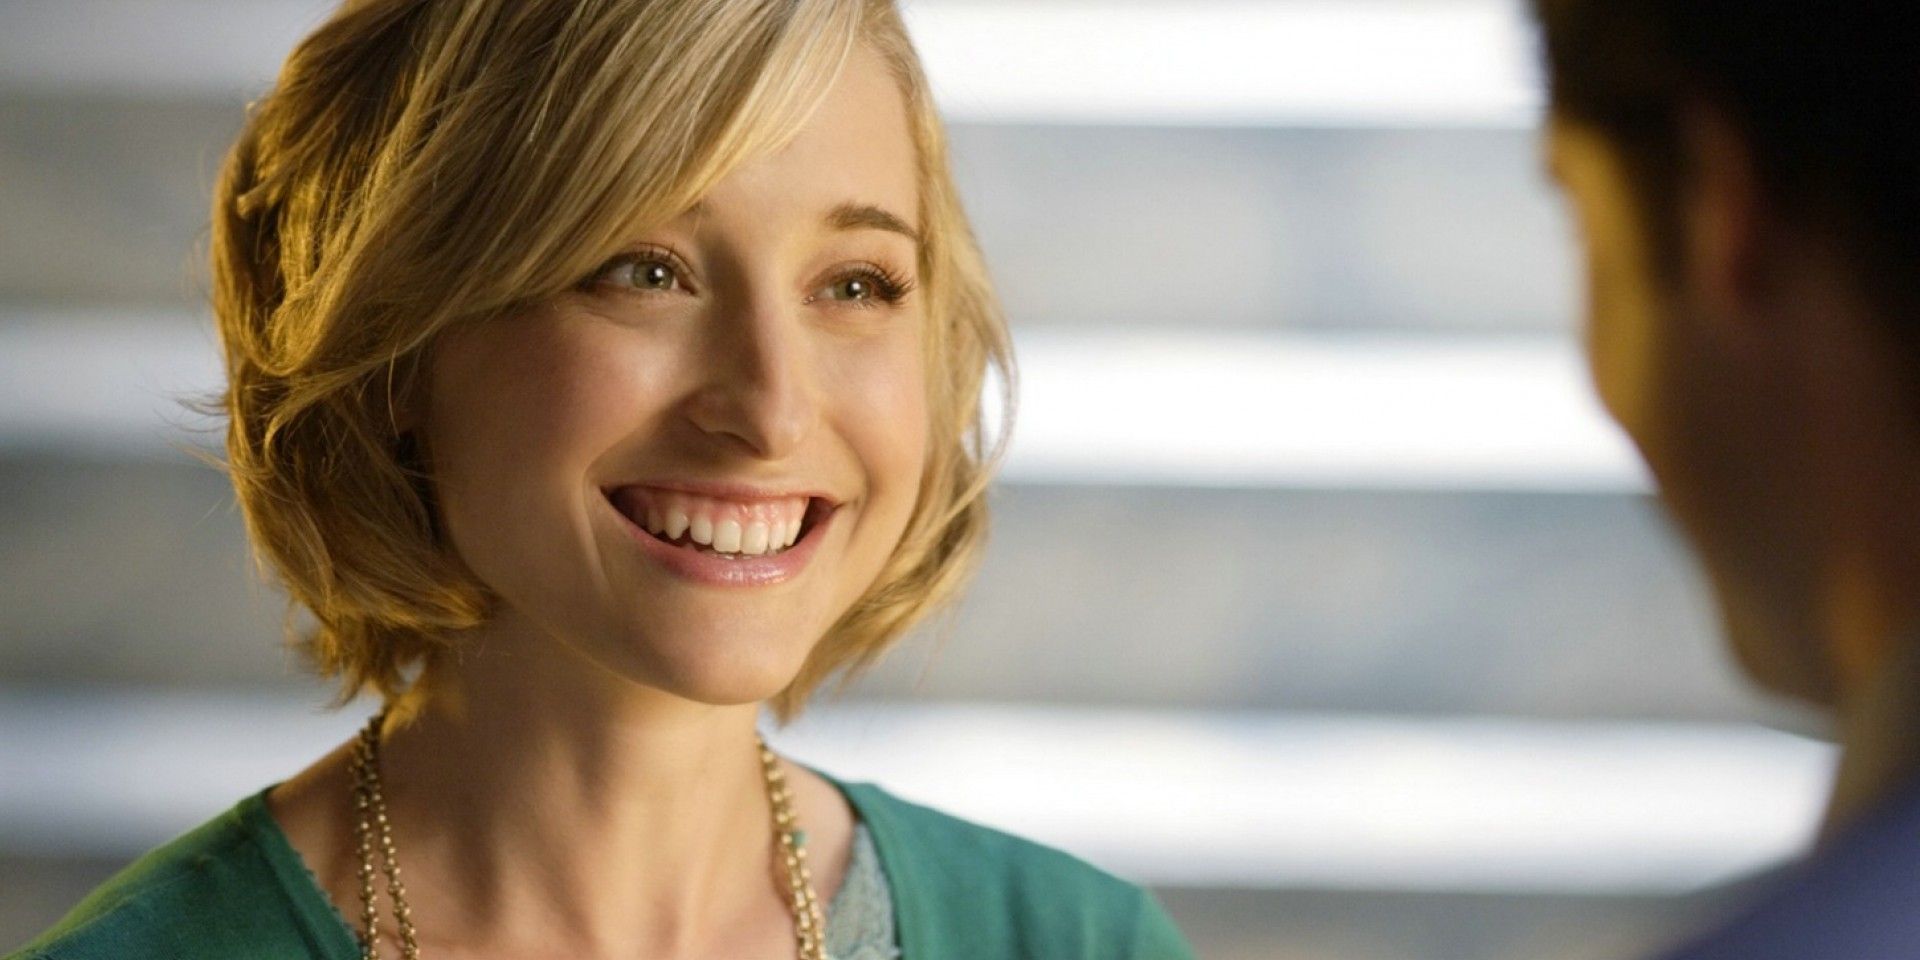 Smallville's Allison Mack Sentenced to 3 Years in Prison for Role in